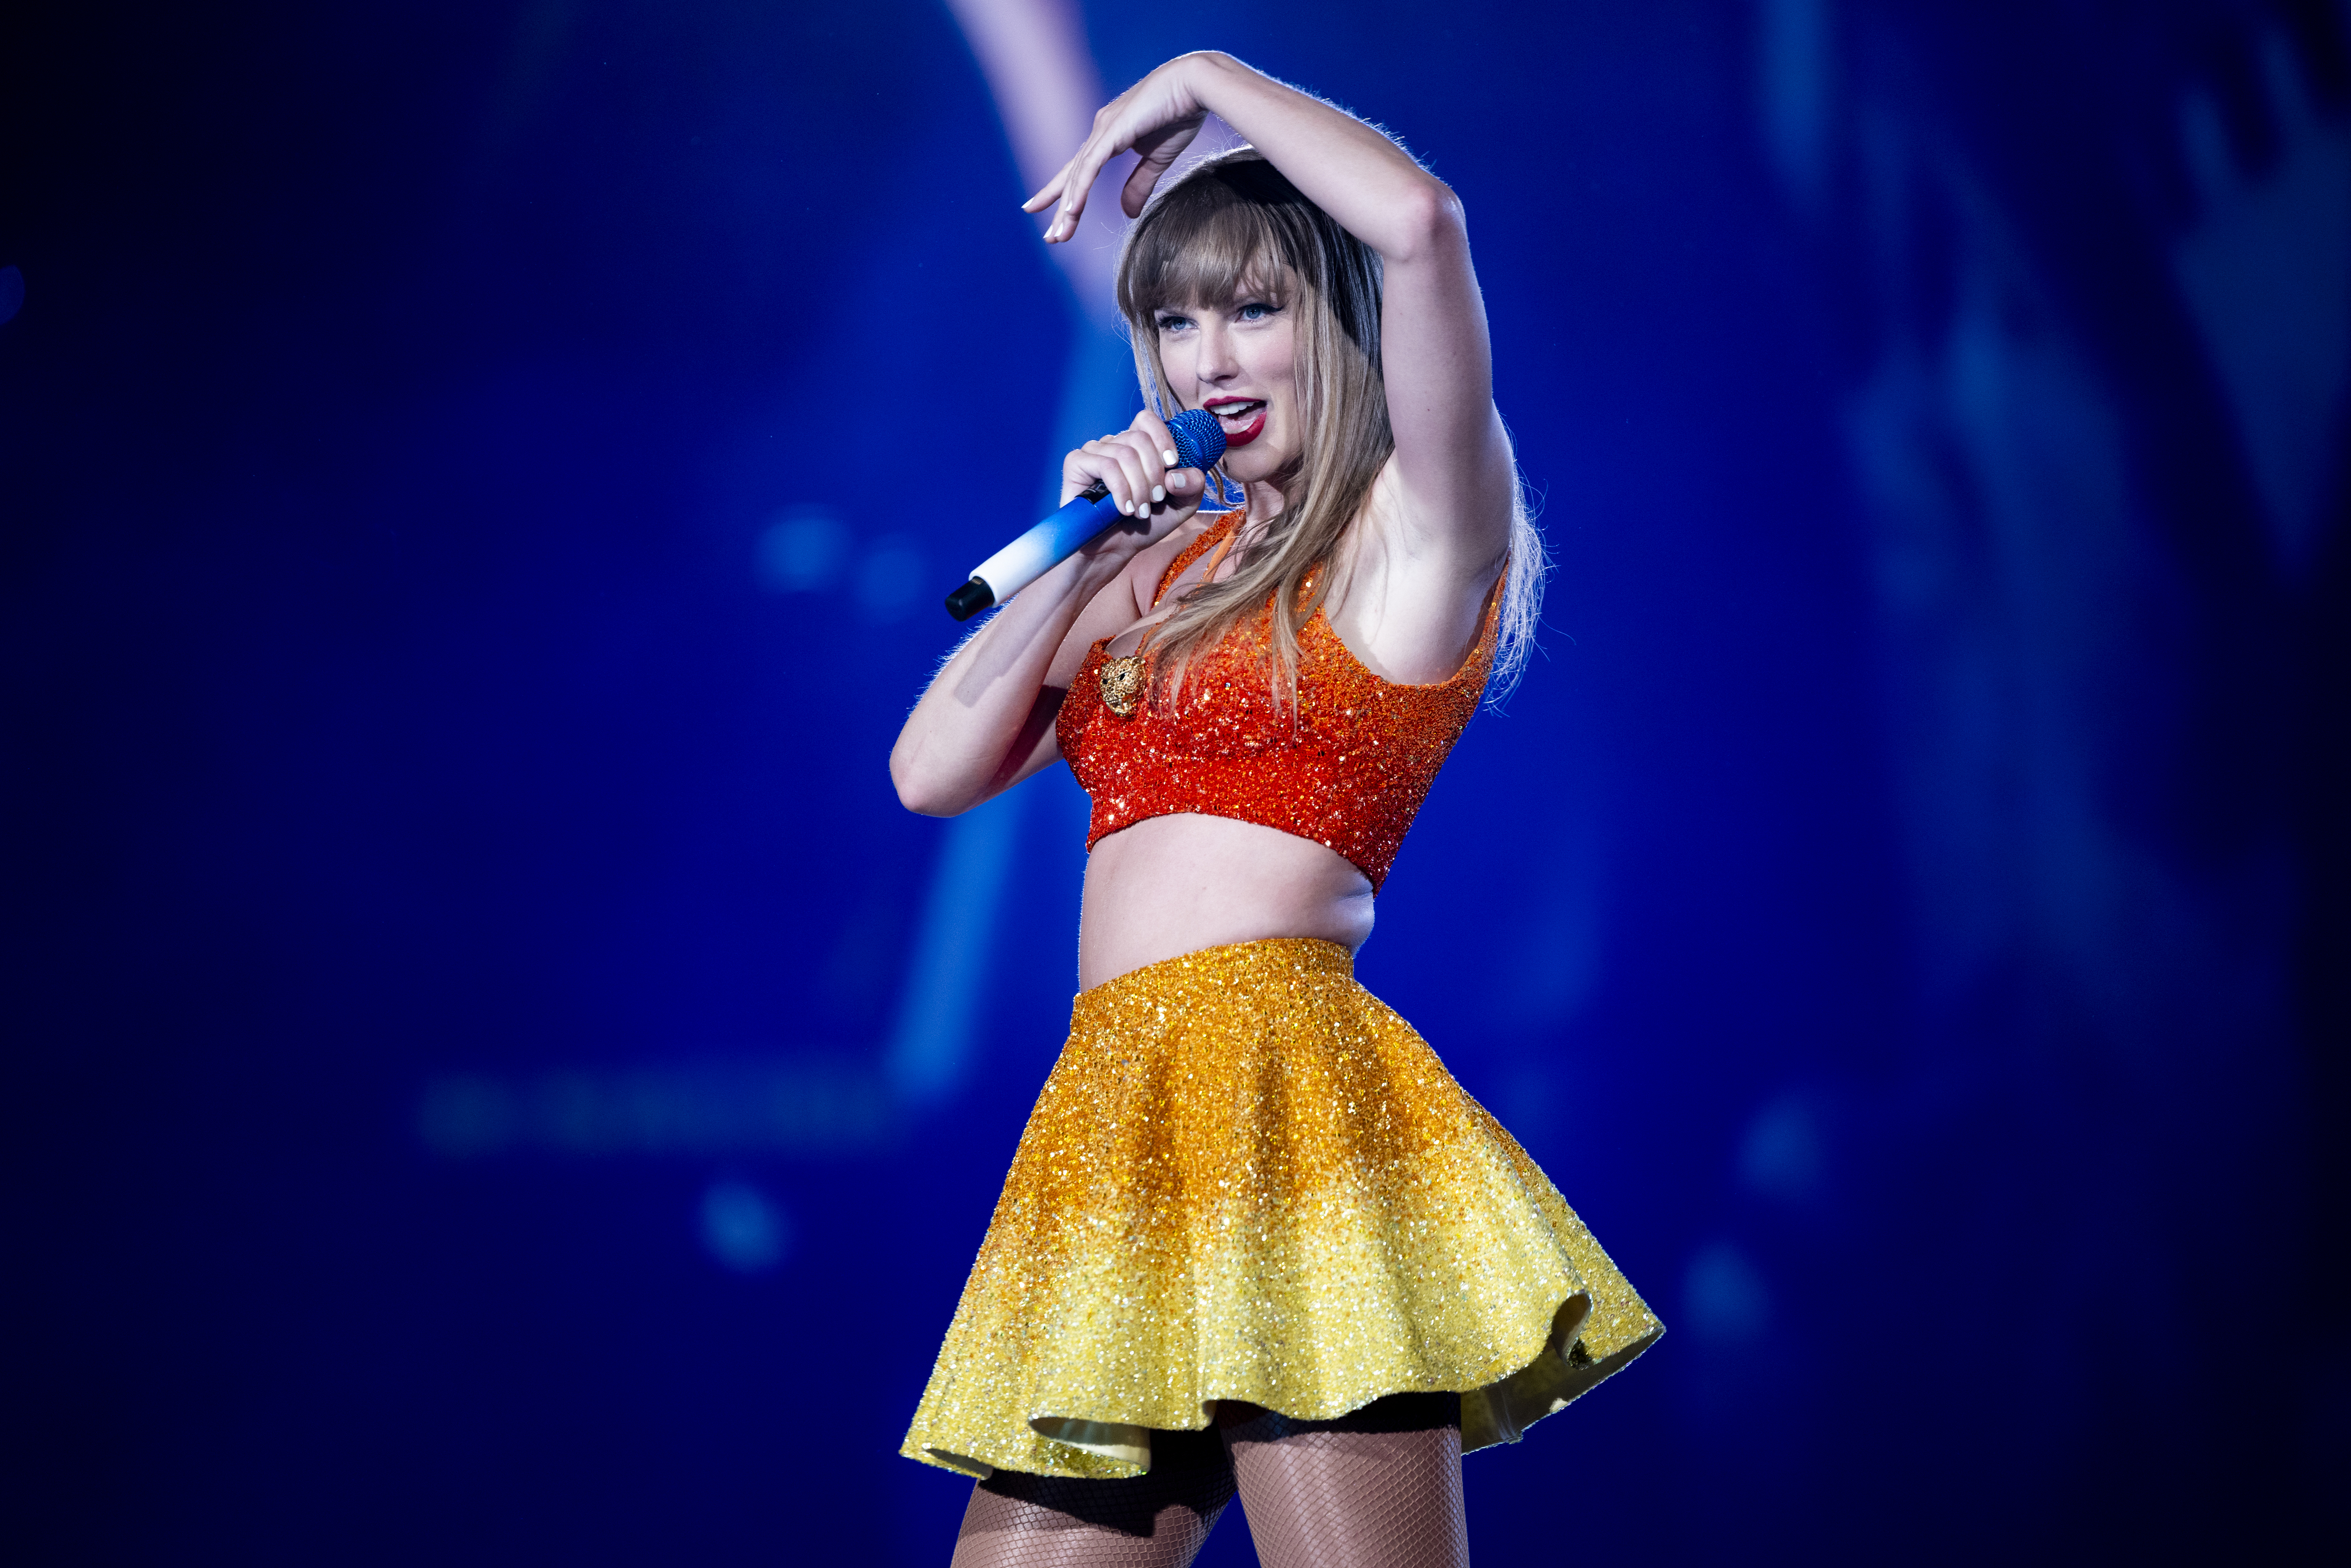 Taylor Swift performs on stage, wearing a sparkling crop top and skirt